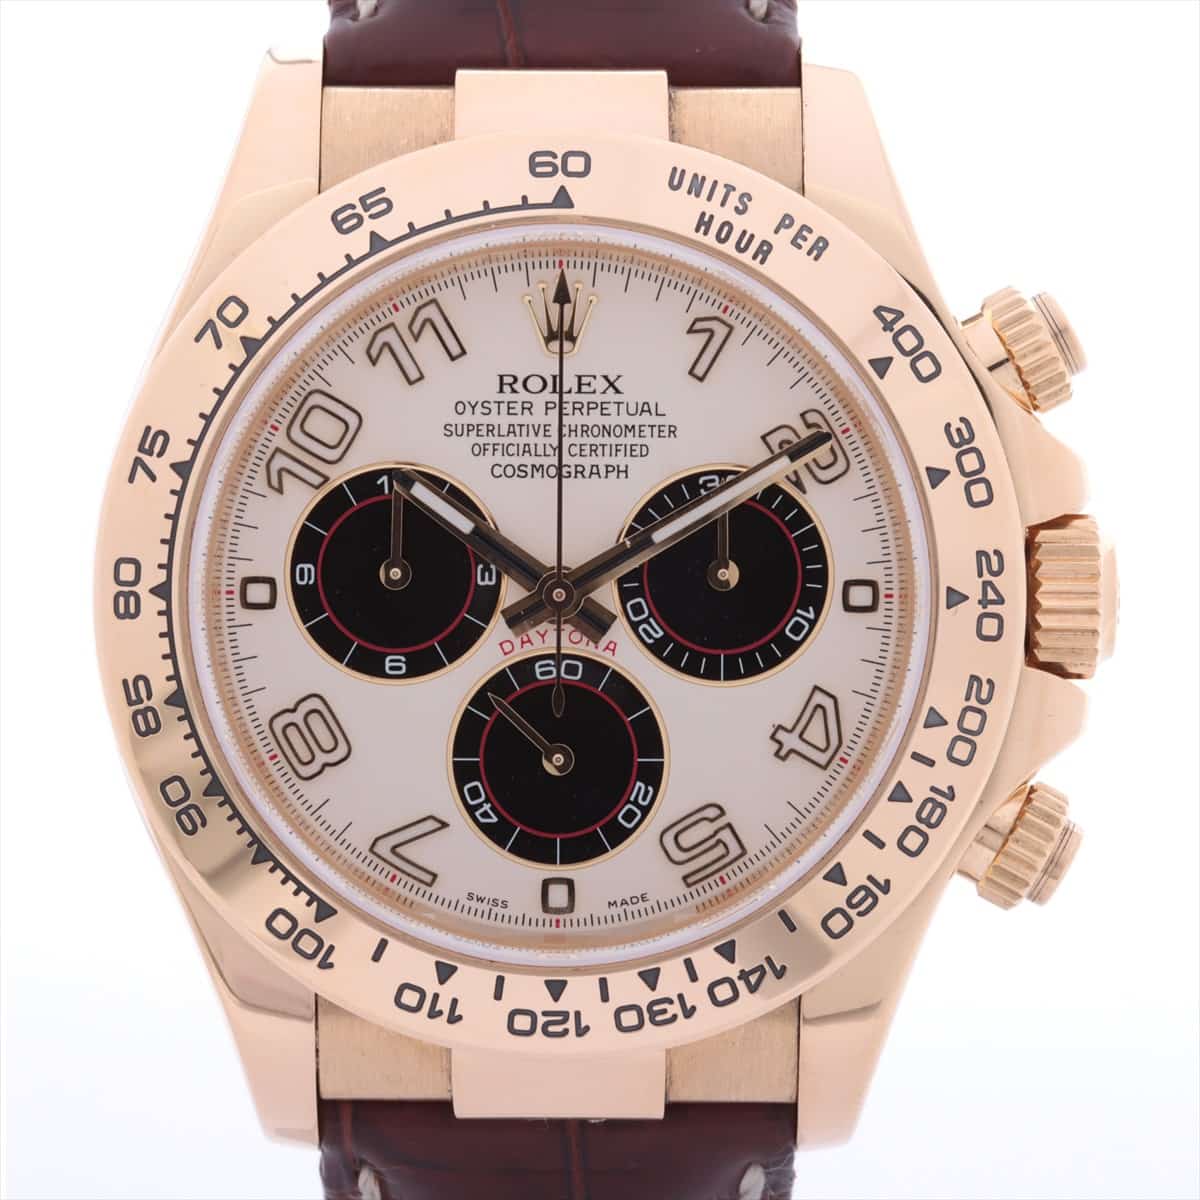 Rolex Daytona 116518 750 & leather AT Ivory-Face Purchased in 2013